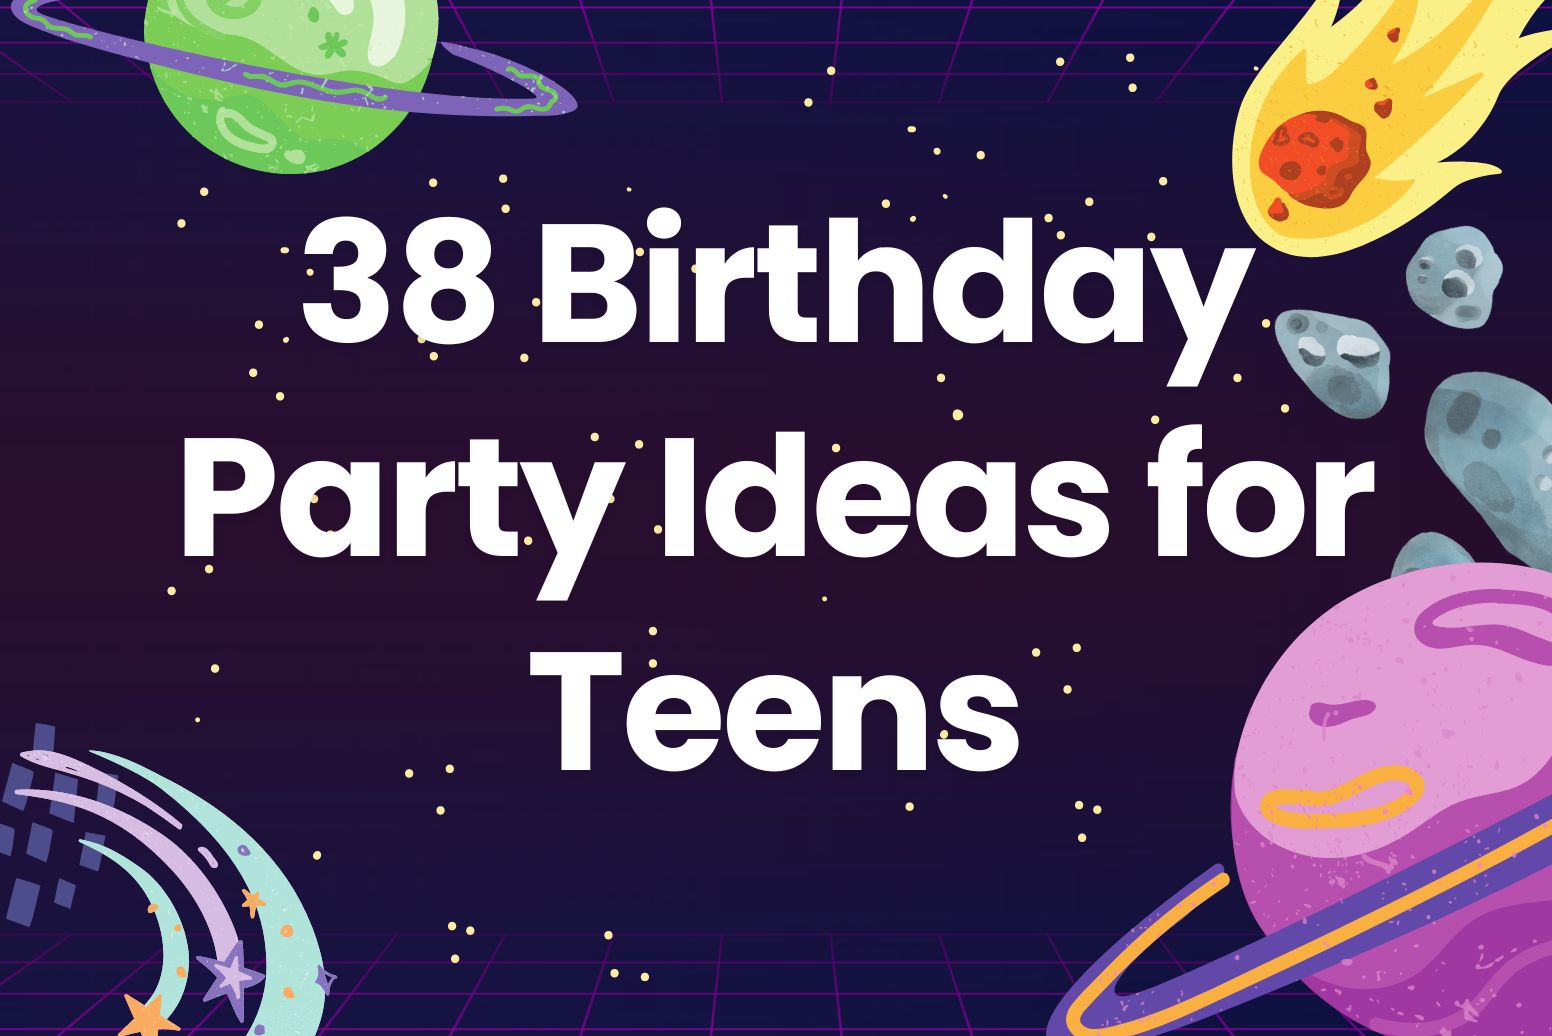 38 Birthday Party Ideas for Teens